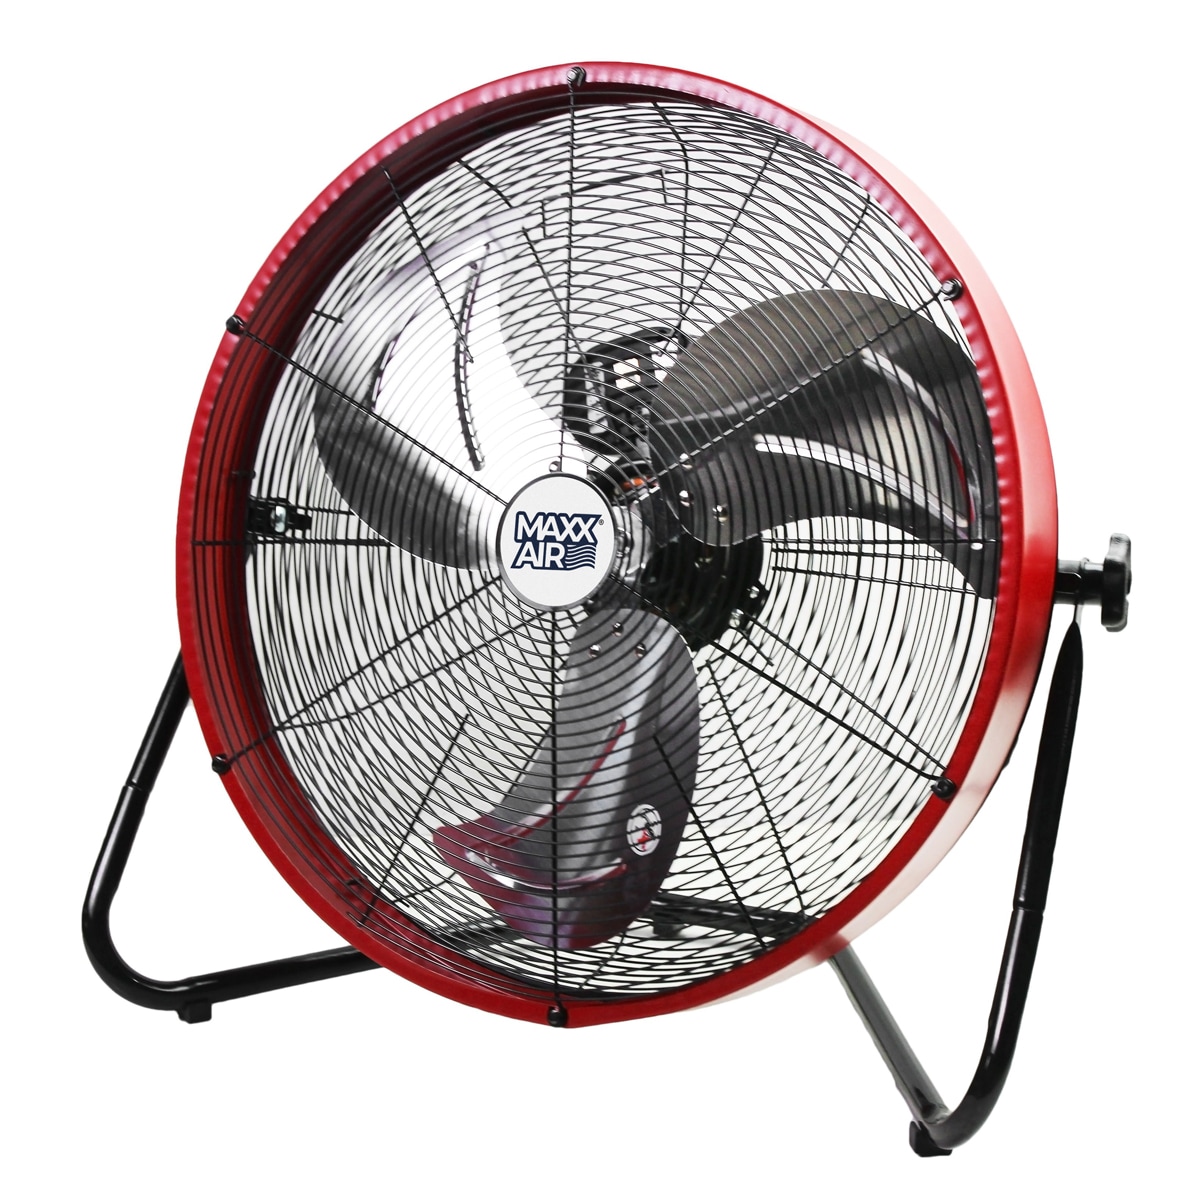 20 INCH HIGH VELOCITY FLOOR STANDING ELECTRIC AIR COOLING FAN FOR GYM 4 SPEED